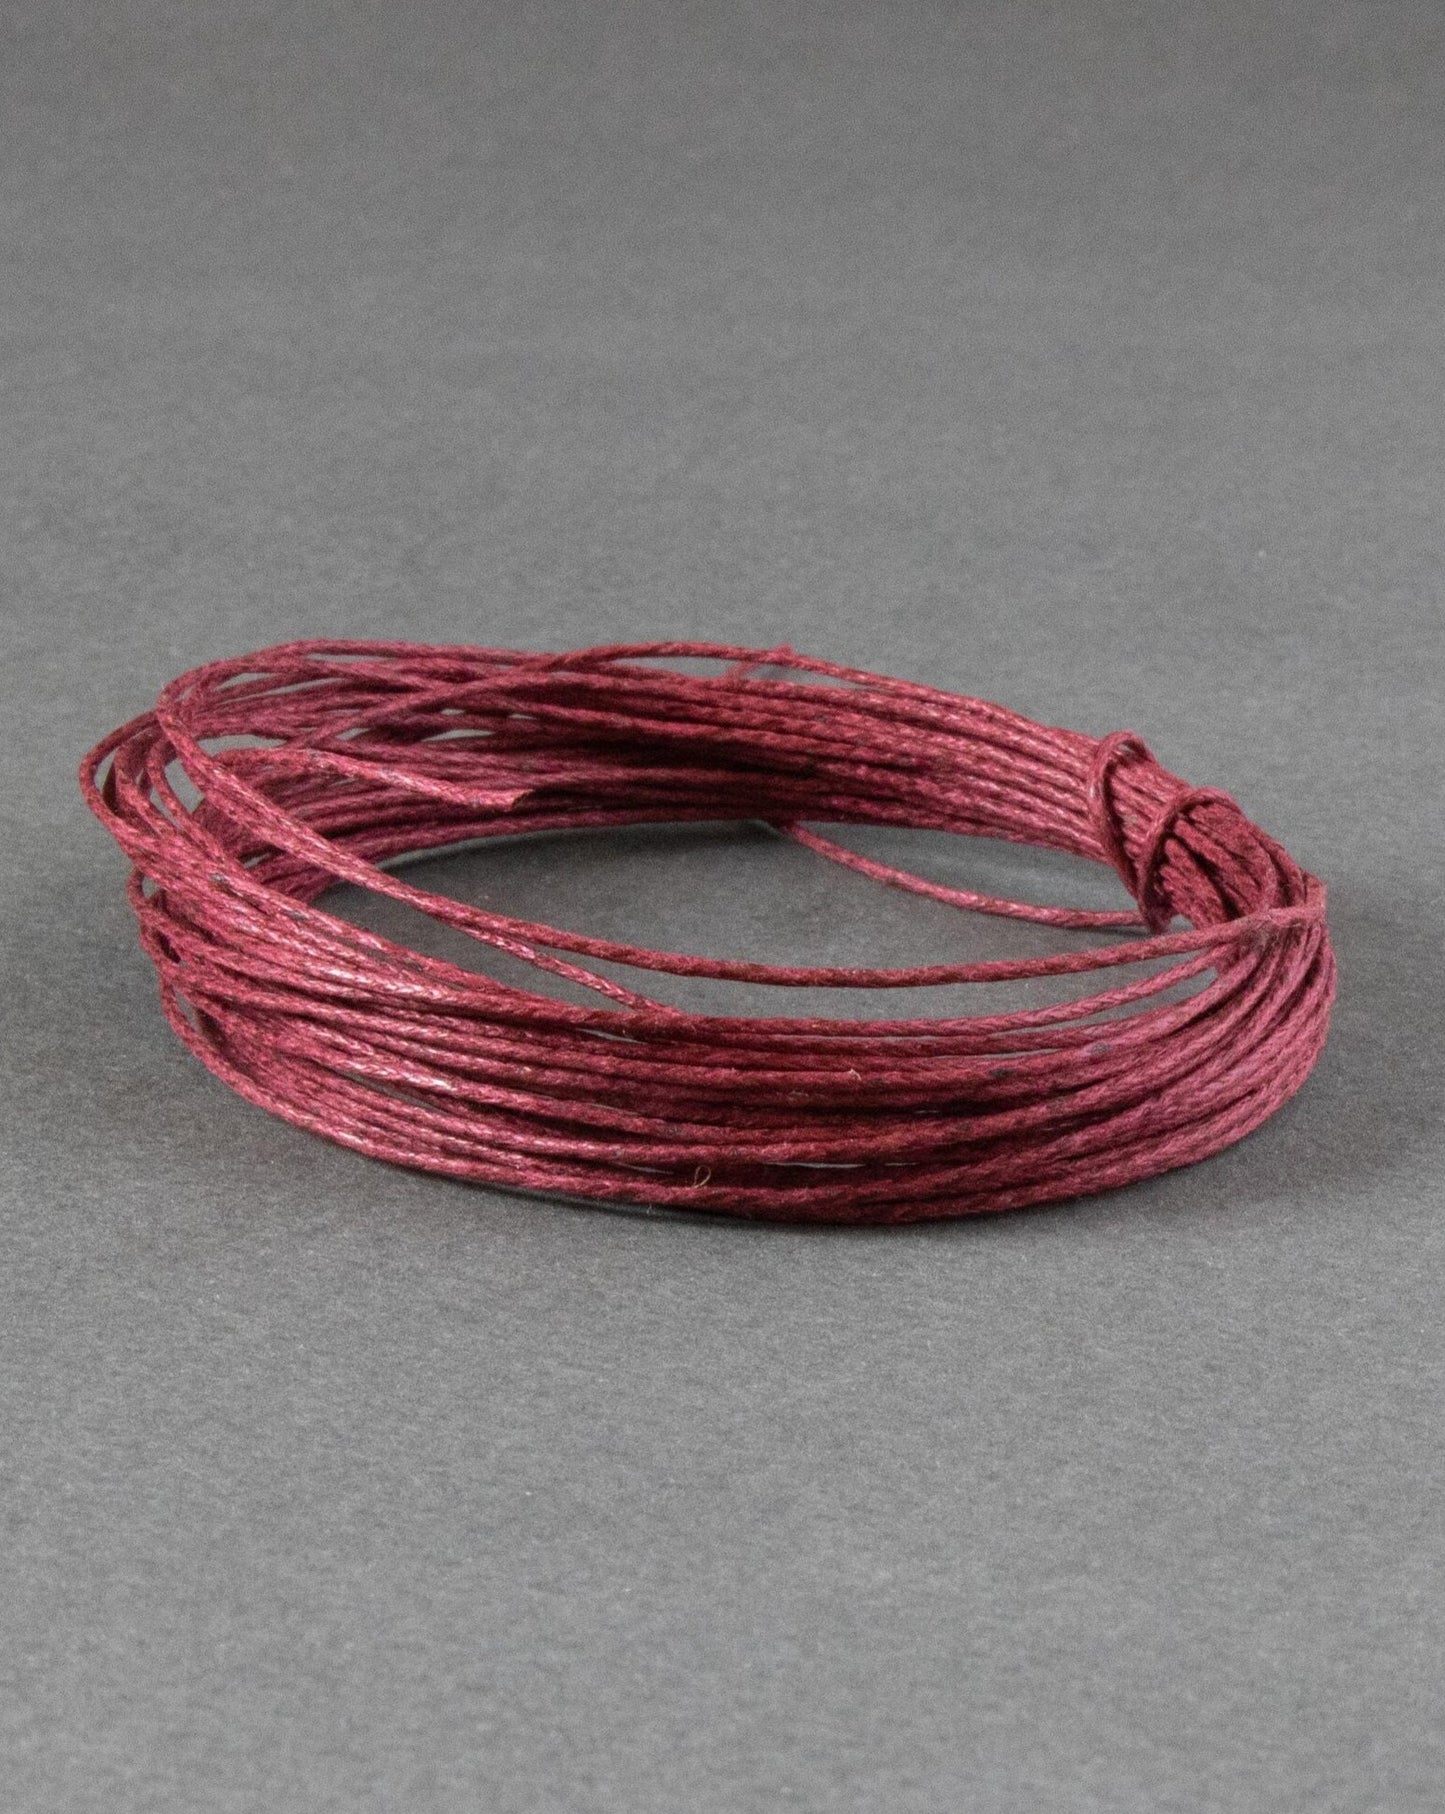 Waxed Cotton Cord in Burgundy